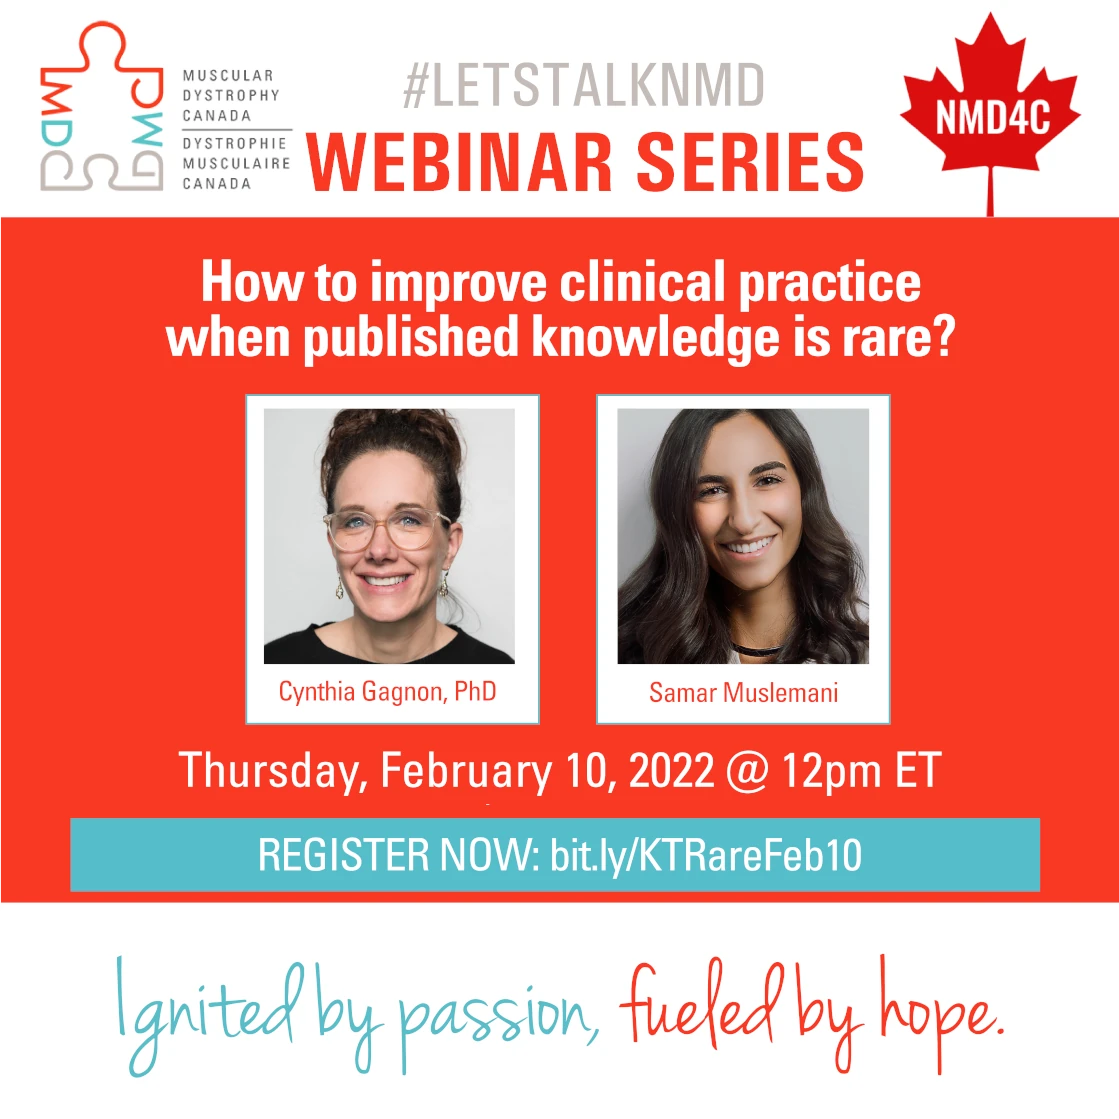 Webinar poster, how to improve clinical practice when published knowledge is rare? Speakers Dr. Cynthia Gagnon and Samar Muslemani.